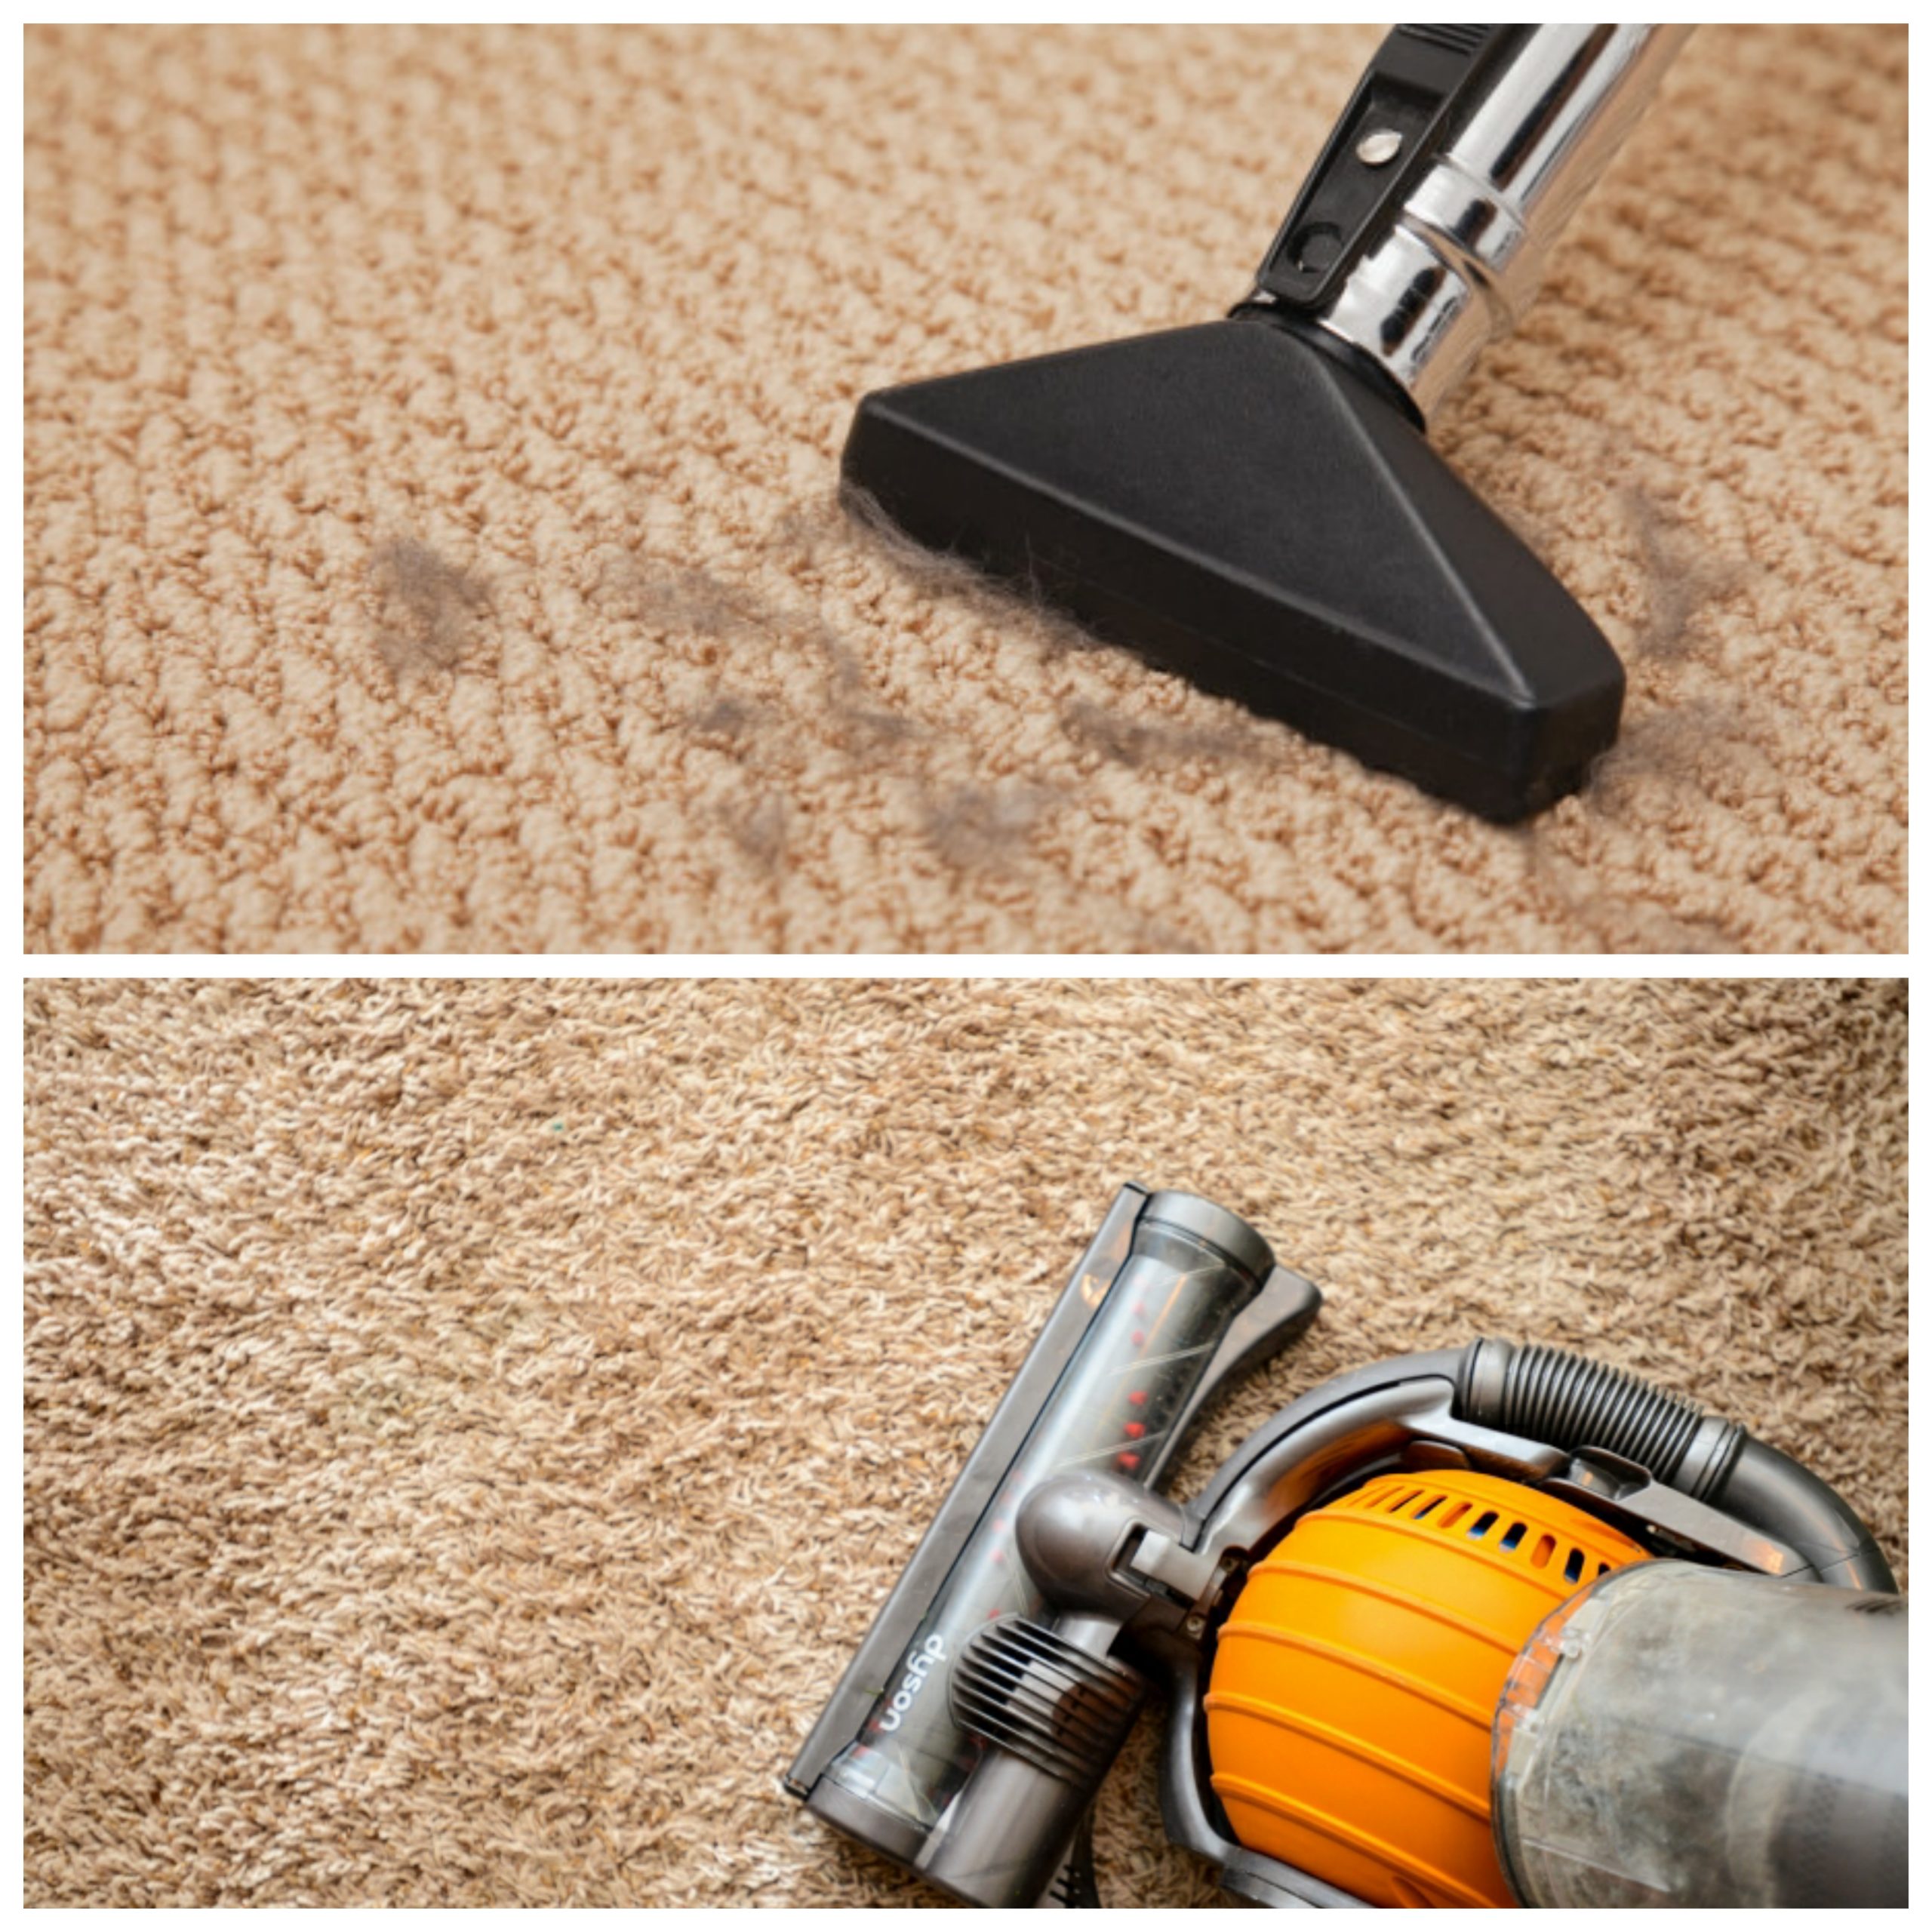 You can Finally Get Rid of those Stains with the Help of Professional Carpet Cleaners